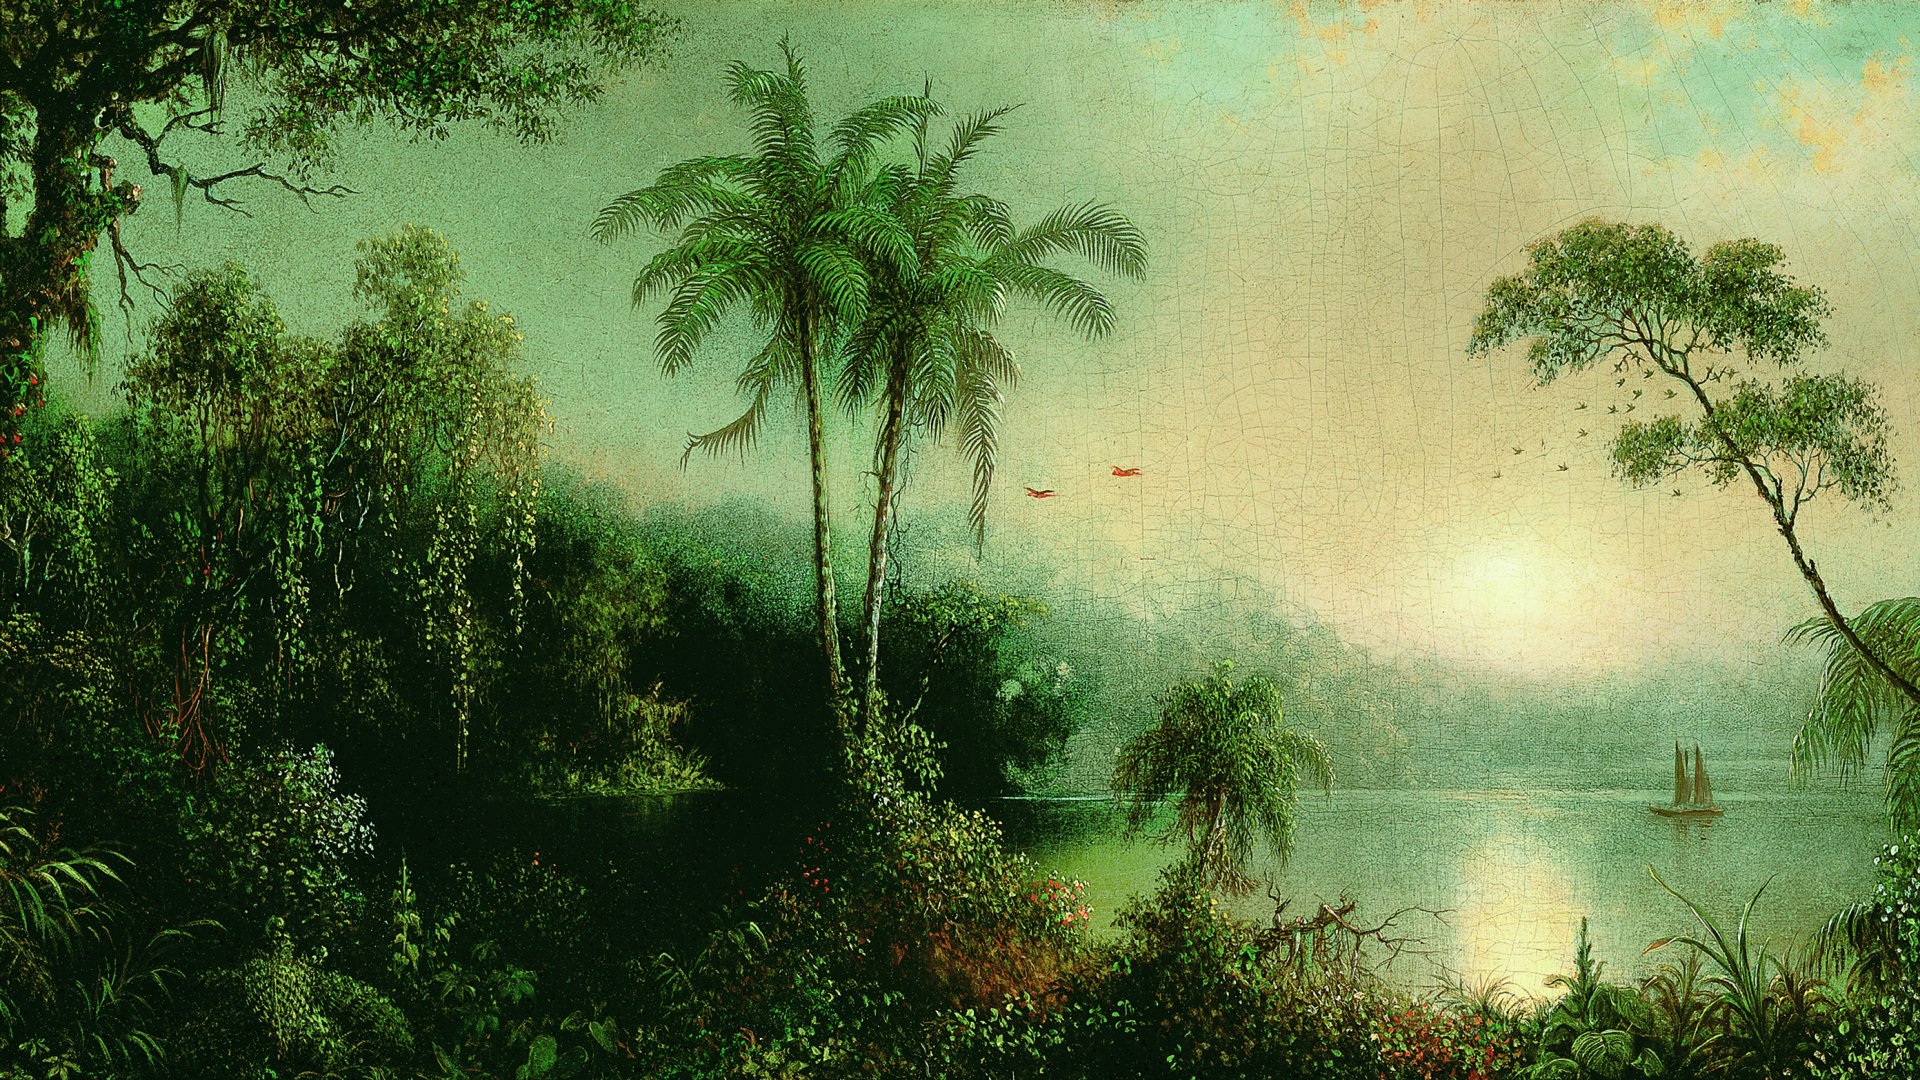 Nature Landscape Nicaragua Painting Artwork Palm Trees Jungle Water Trees Sailing Ship Clouds 1920x1080